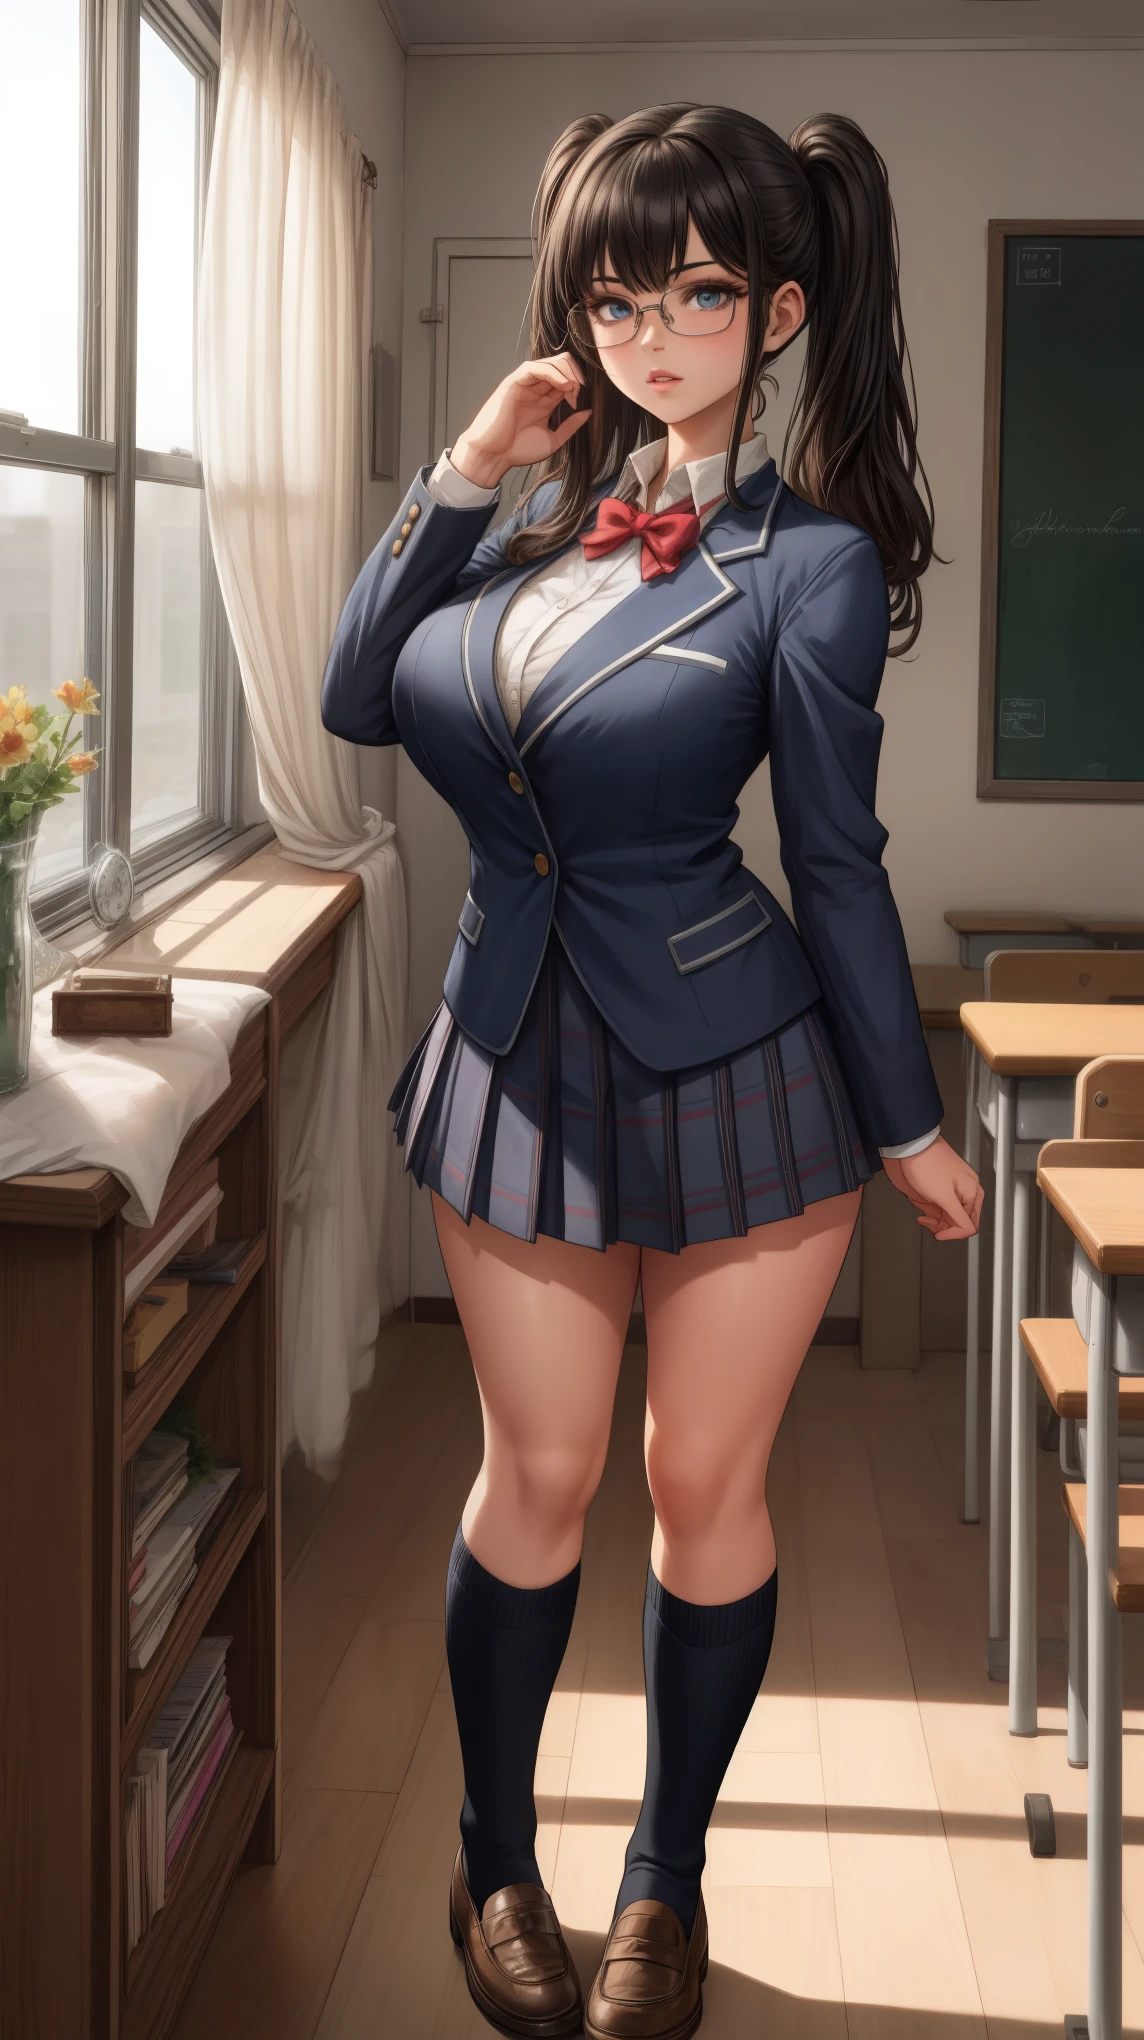 anime female character in school uniform, with short skirt, 
BREAK
, nakamuramisaki, twin tail, Glasses, black hair, (Beautiful,Huge_Breasts:1.3), milf,
BREAK
, 1girl, solo, Standing in the garden, full body, full figure,
BREAK
, Beautifully detailed illustration of a cozy and meticulously decorated school classroom with warm lighting, vibrant colors, and an inviting atmosphere.
BREAK
, school uniform, thigh-highs, ブレザー burezaa (Blazer), bow, , bowtie, shoes, loafers, ribbon,
BREAK
, beautiful detailed eyes, beautiful detailed lips, extremely detailed eyes and face, long eyelashes,
BREAK
, medium: oil painting, atmospheric lighting, dreamy color palette, detailed interior decoration, quiet and peaceful ambiance,
BREAK
, (best quality,4k,8k,highres,masterpiece:1.2), ultra-detailed,